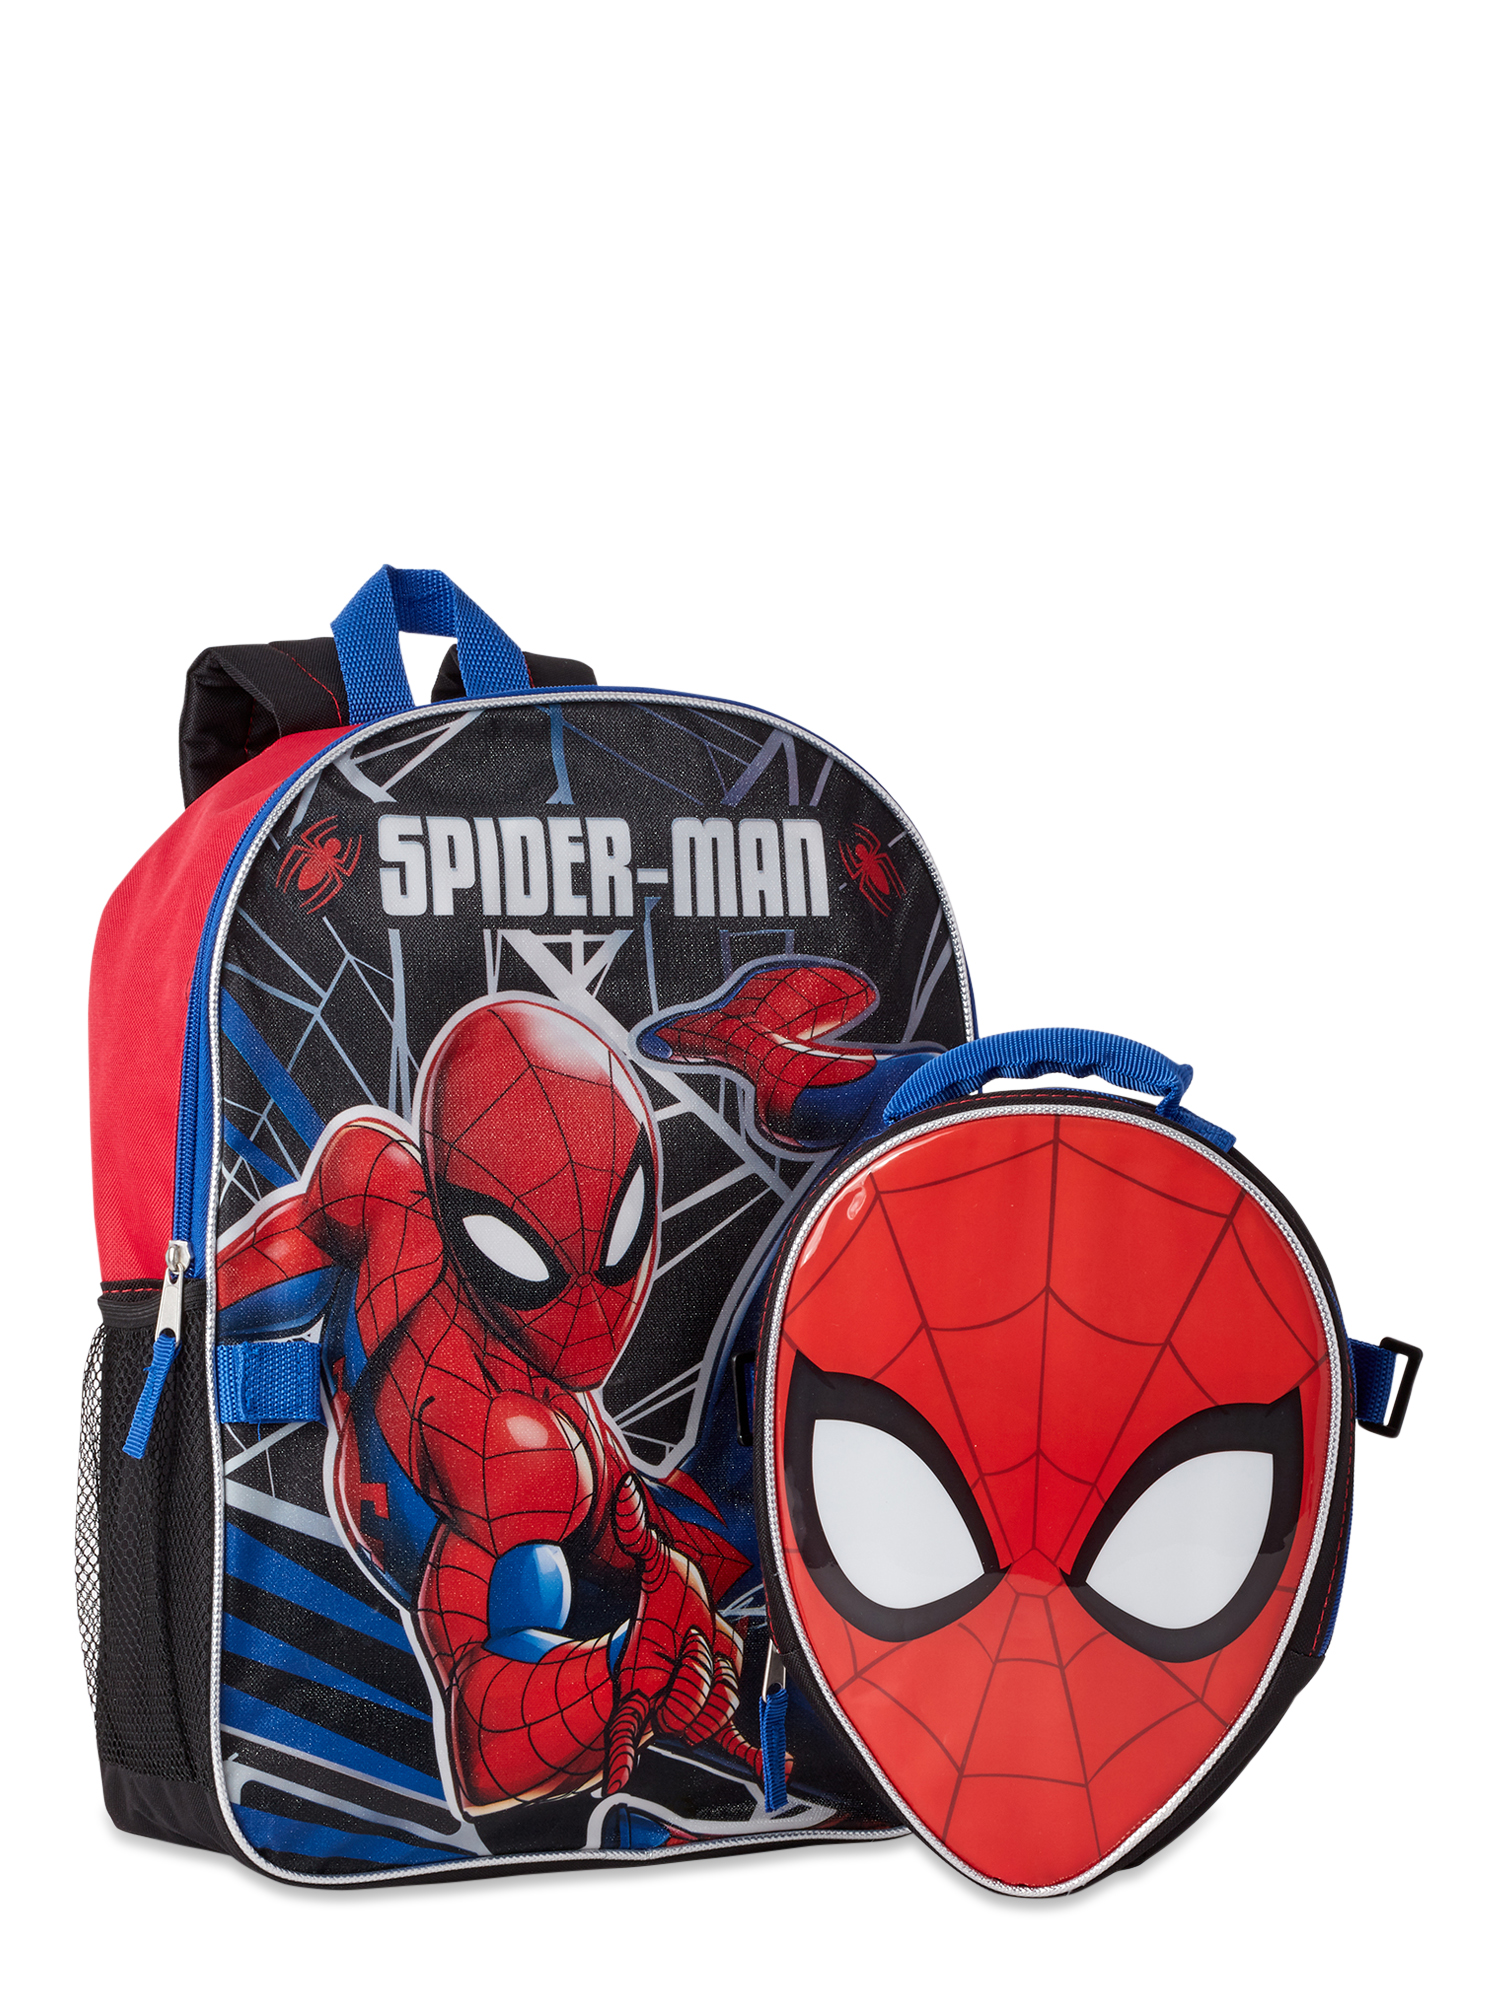 Spider-Man Backpack with Lunch Bag - image 1 of 4